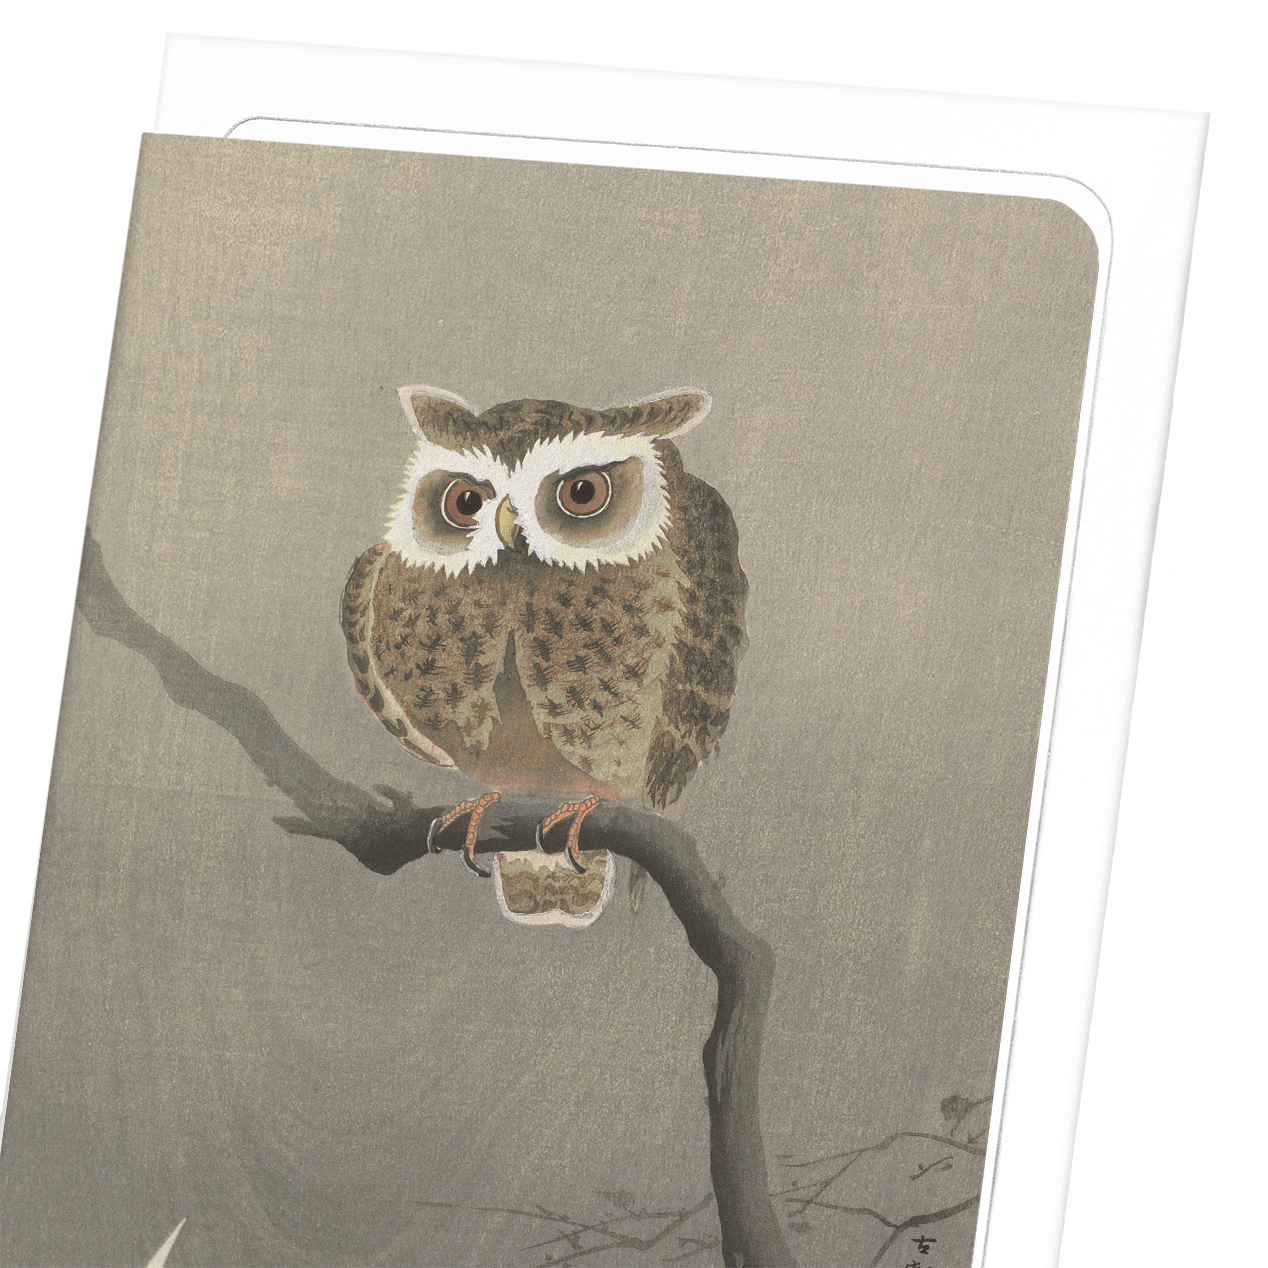 LONG-EARED OWL ON TREE BRANCH: Japanese Greeting Card